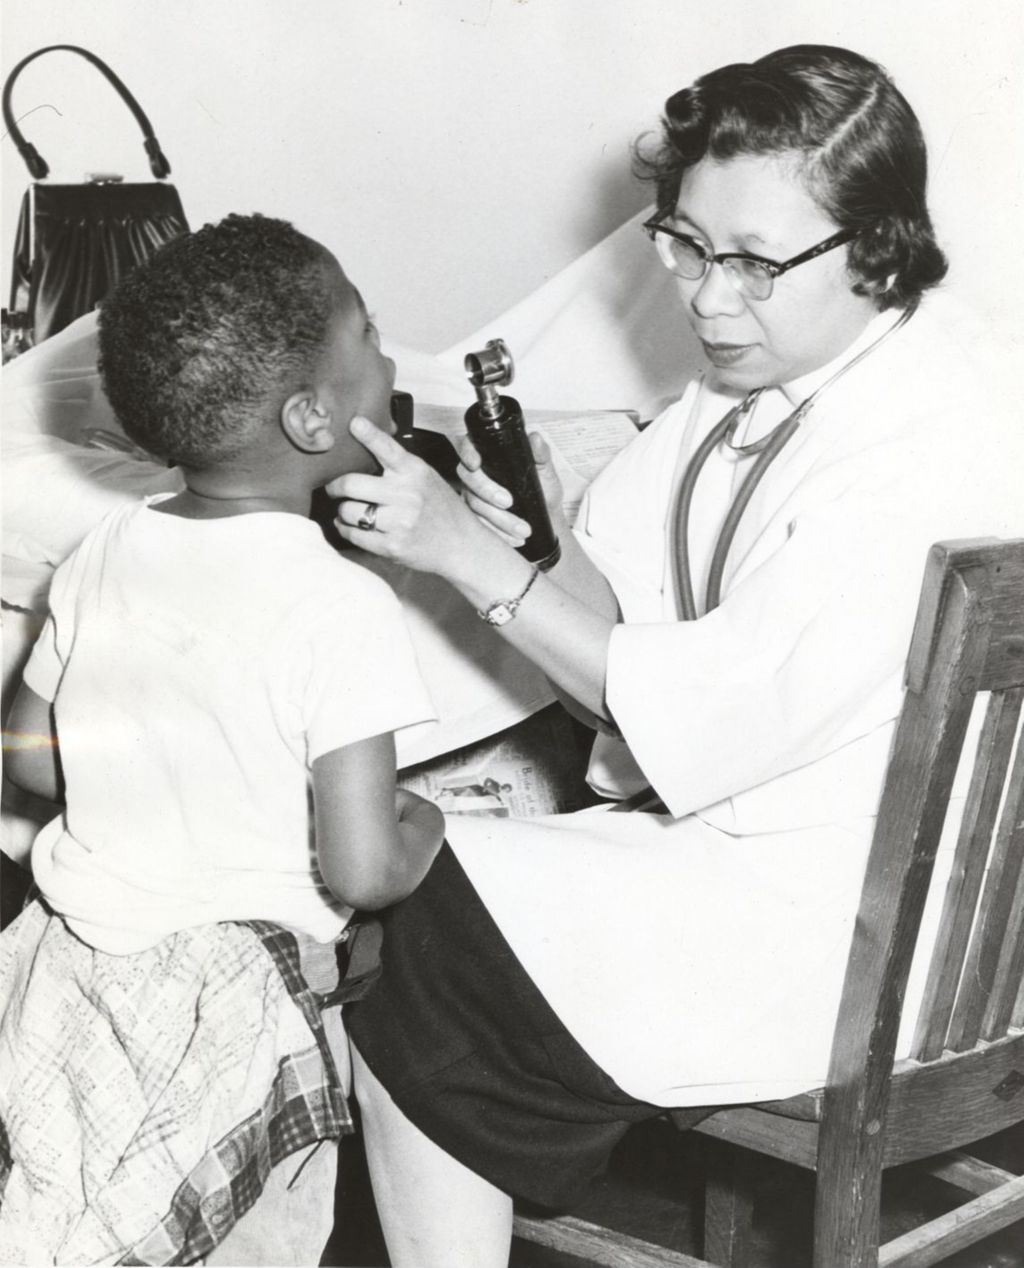 Miniature of Doctor examining a young boy